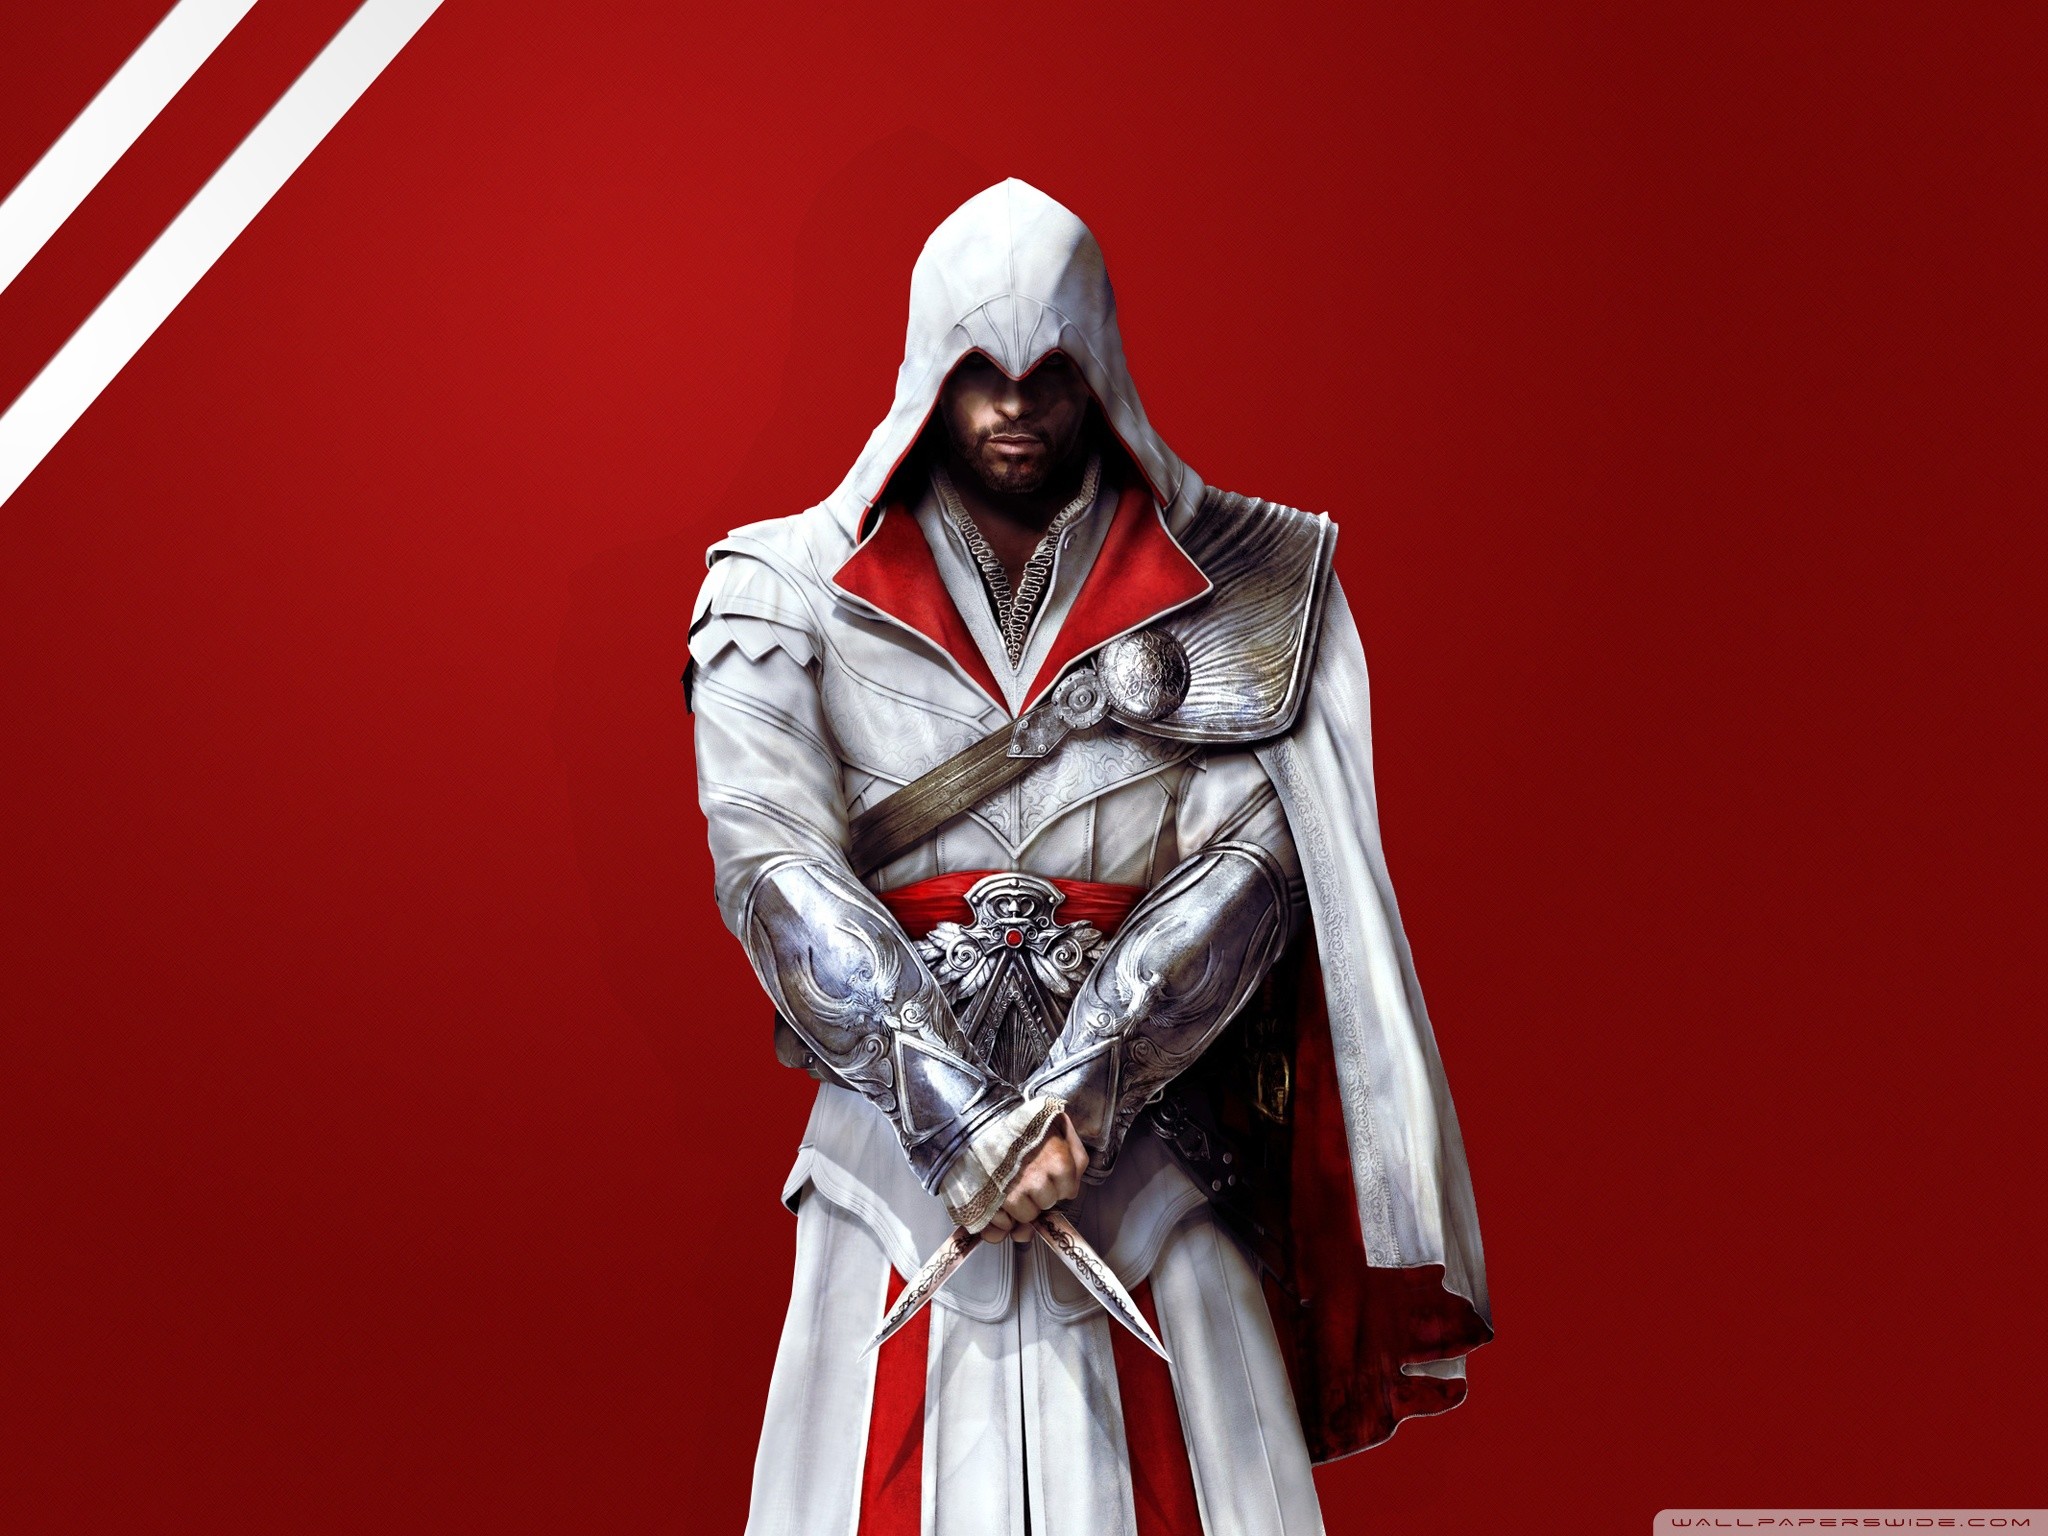 2048x1536 The Assassin's images Ezio Auditore HD wallpaper and background photos